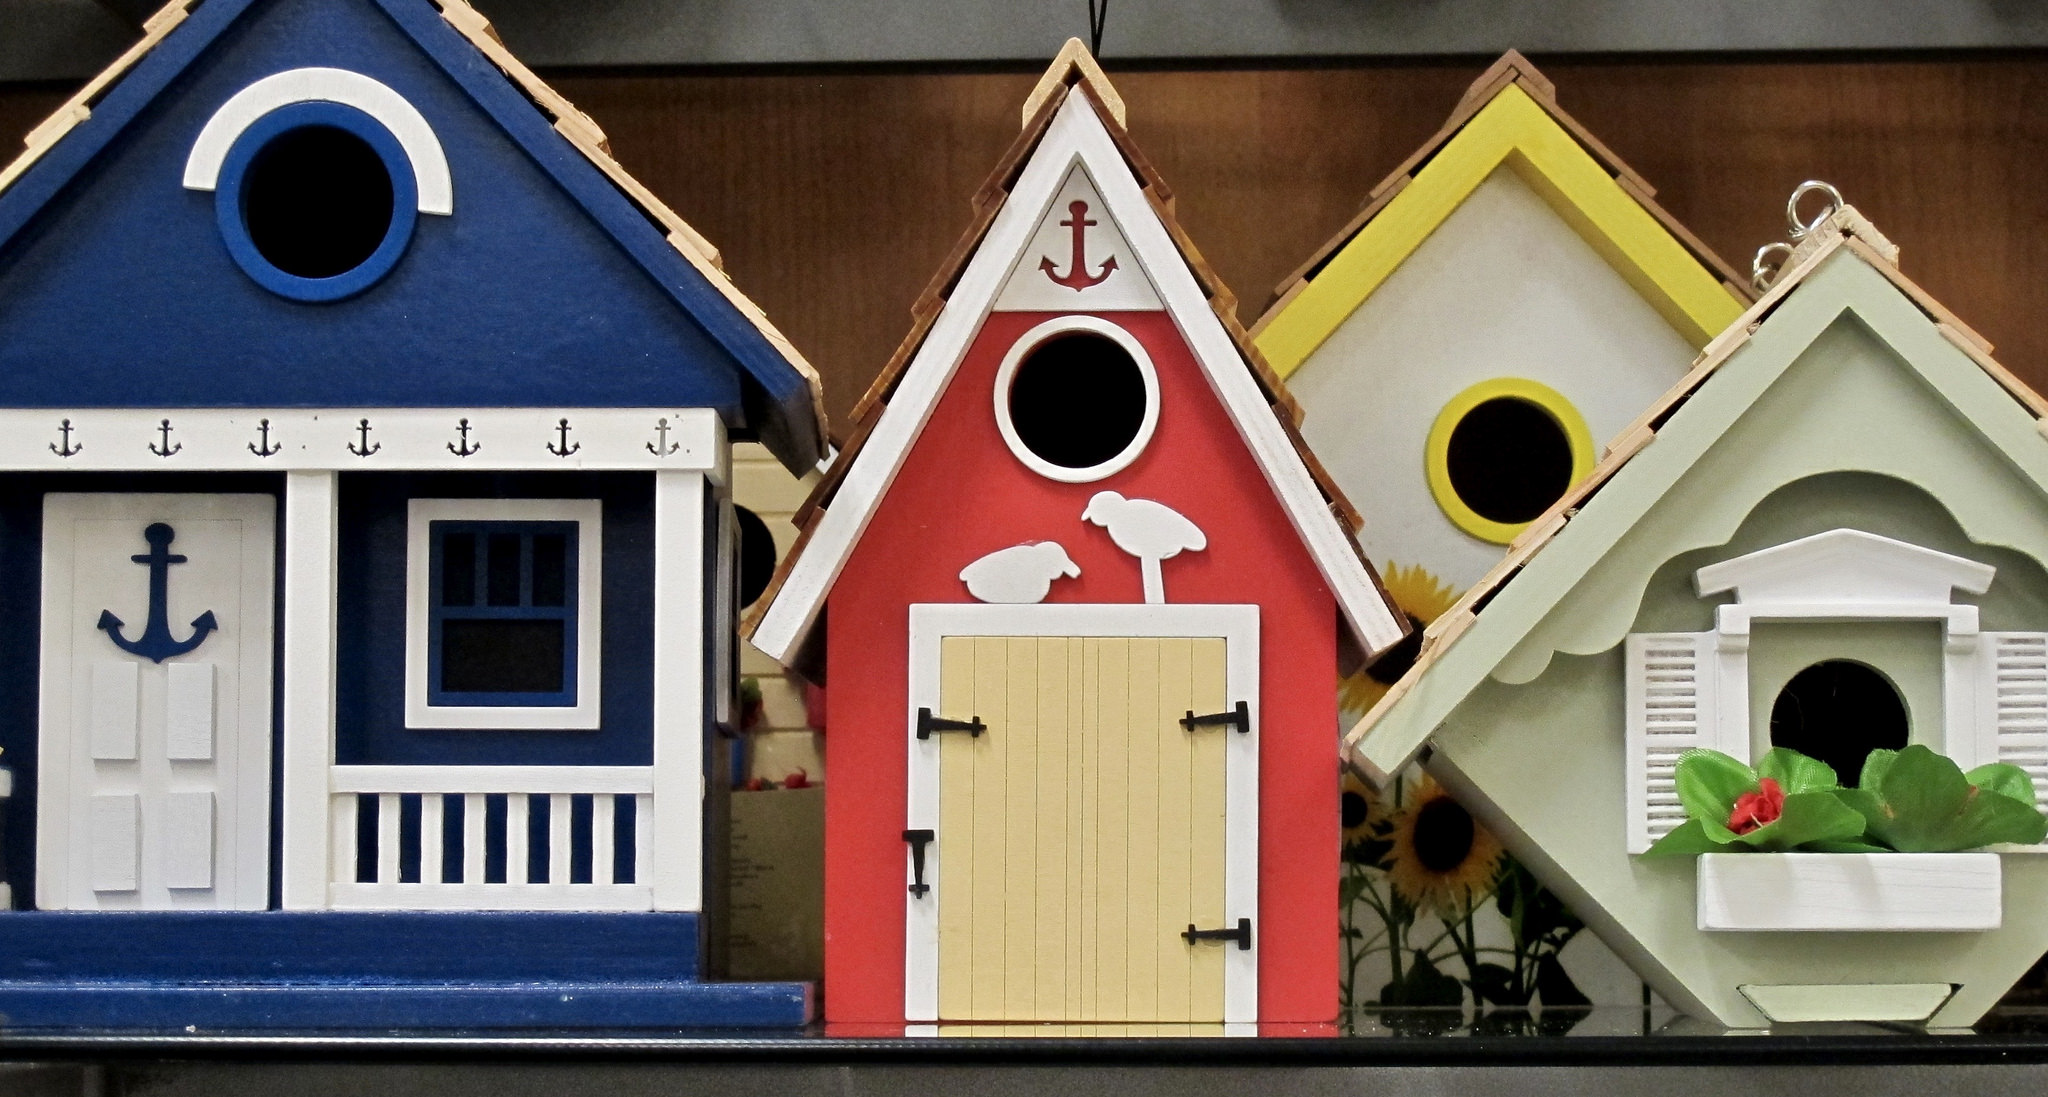 Three different, ornate, brightly colored birdhouses.